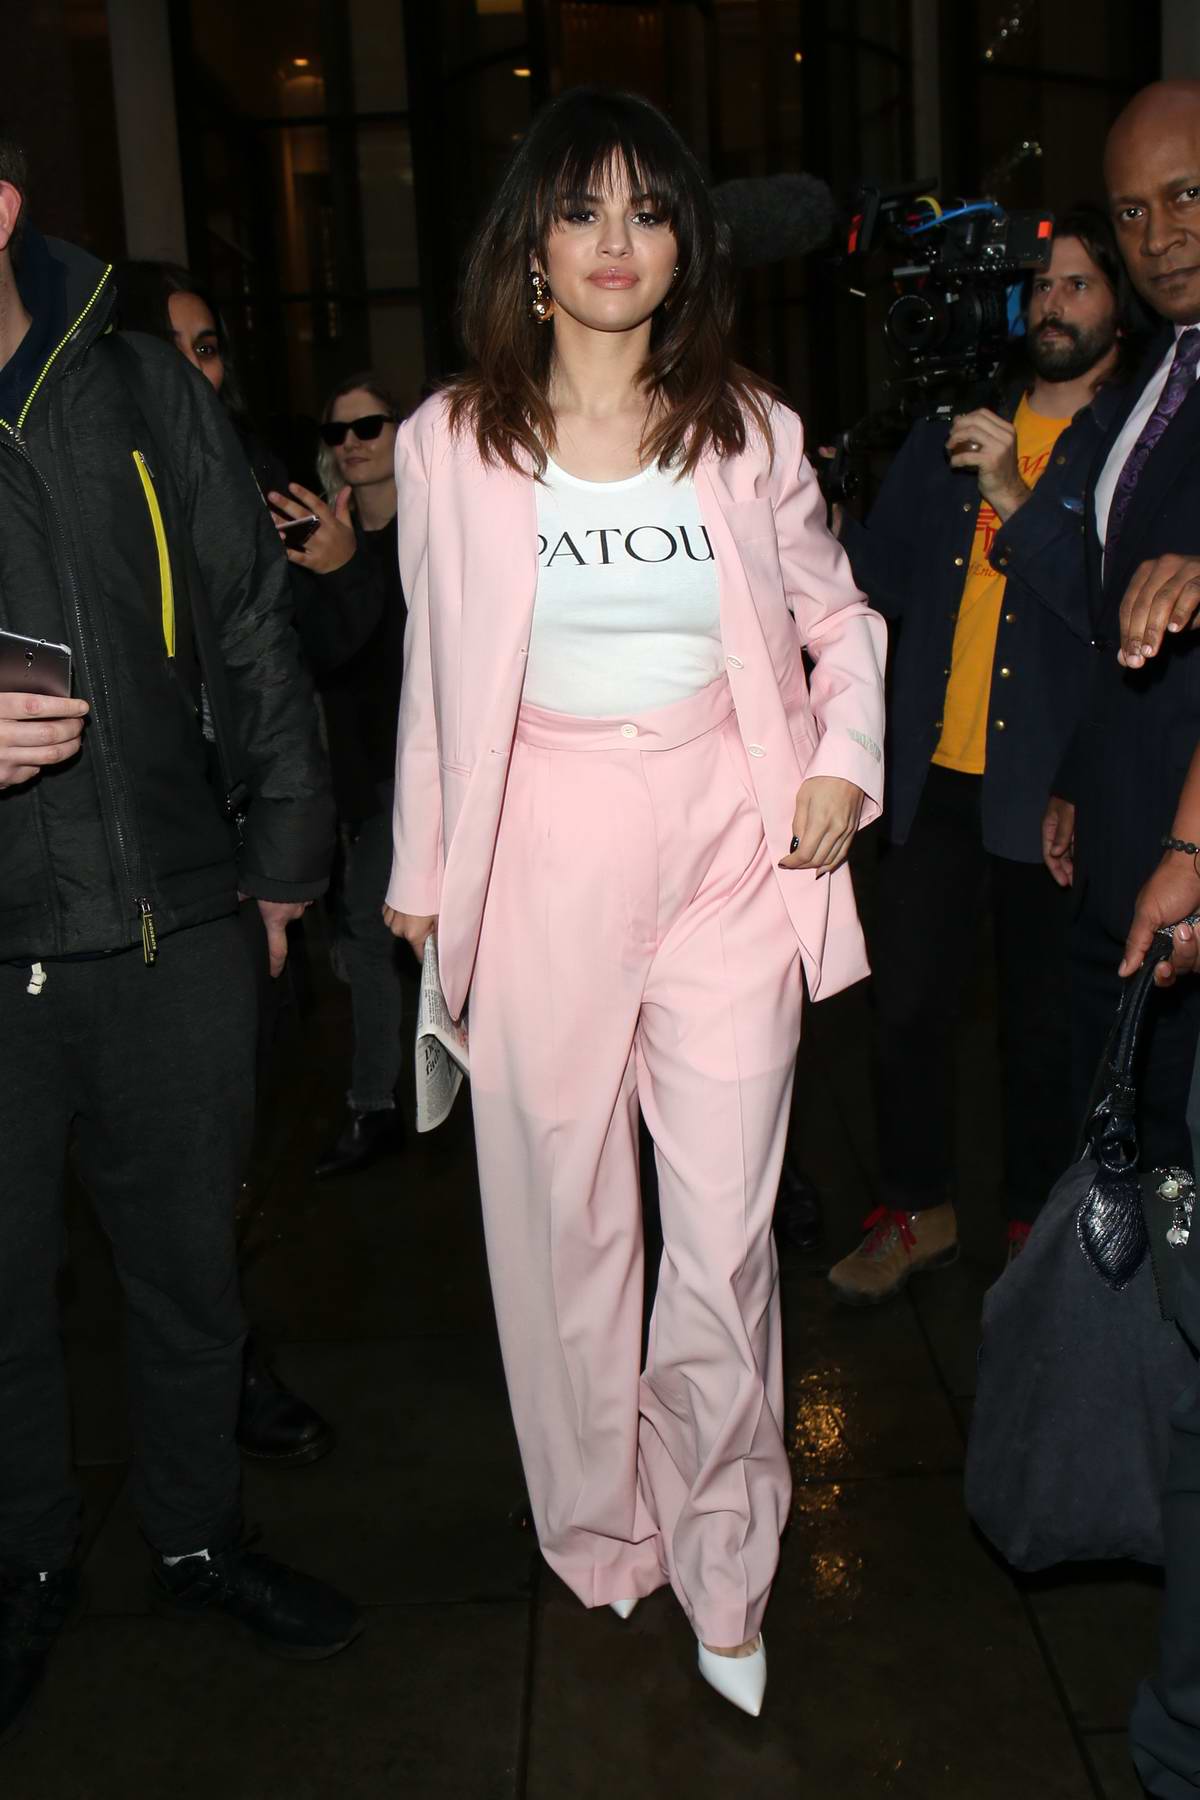 Selena Gomez looks pretty in a baby pink suit as she steps in London, UK